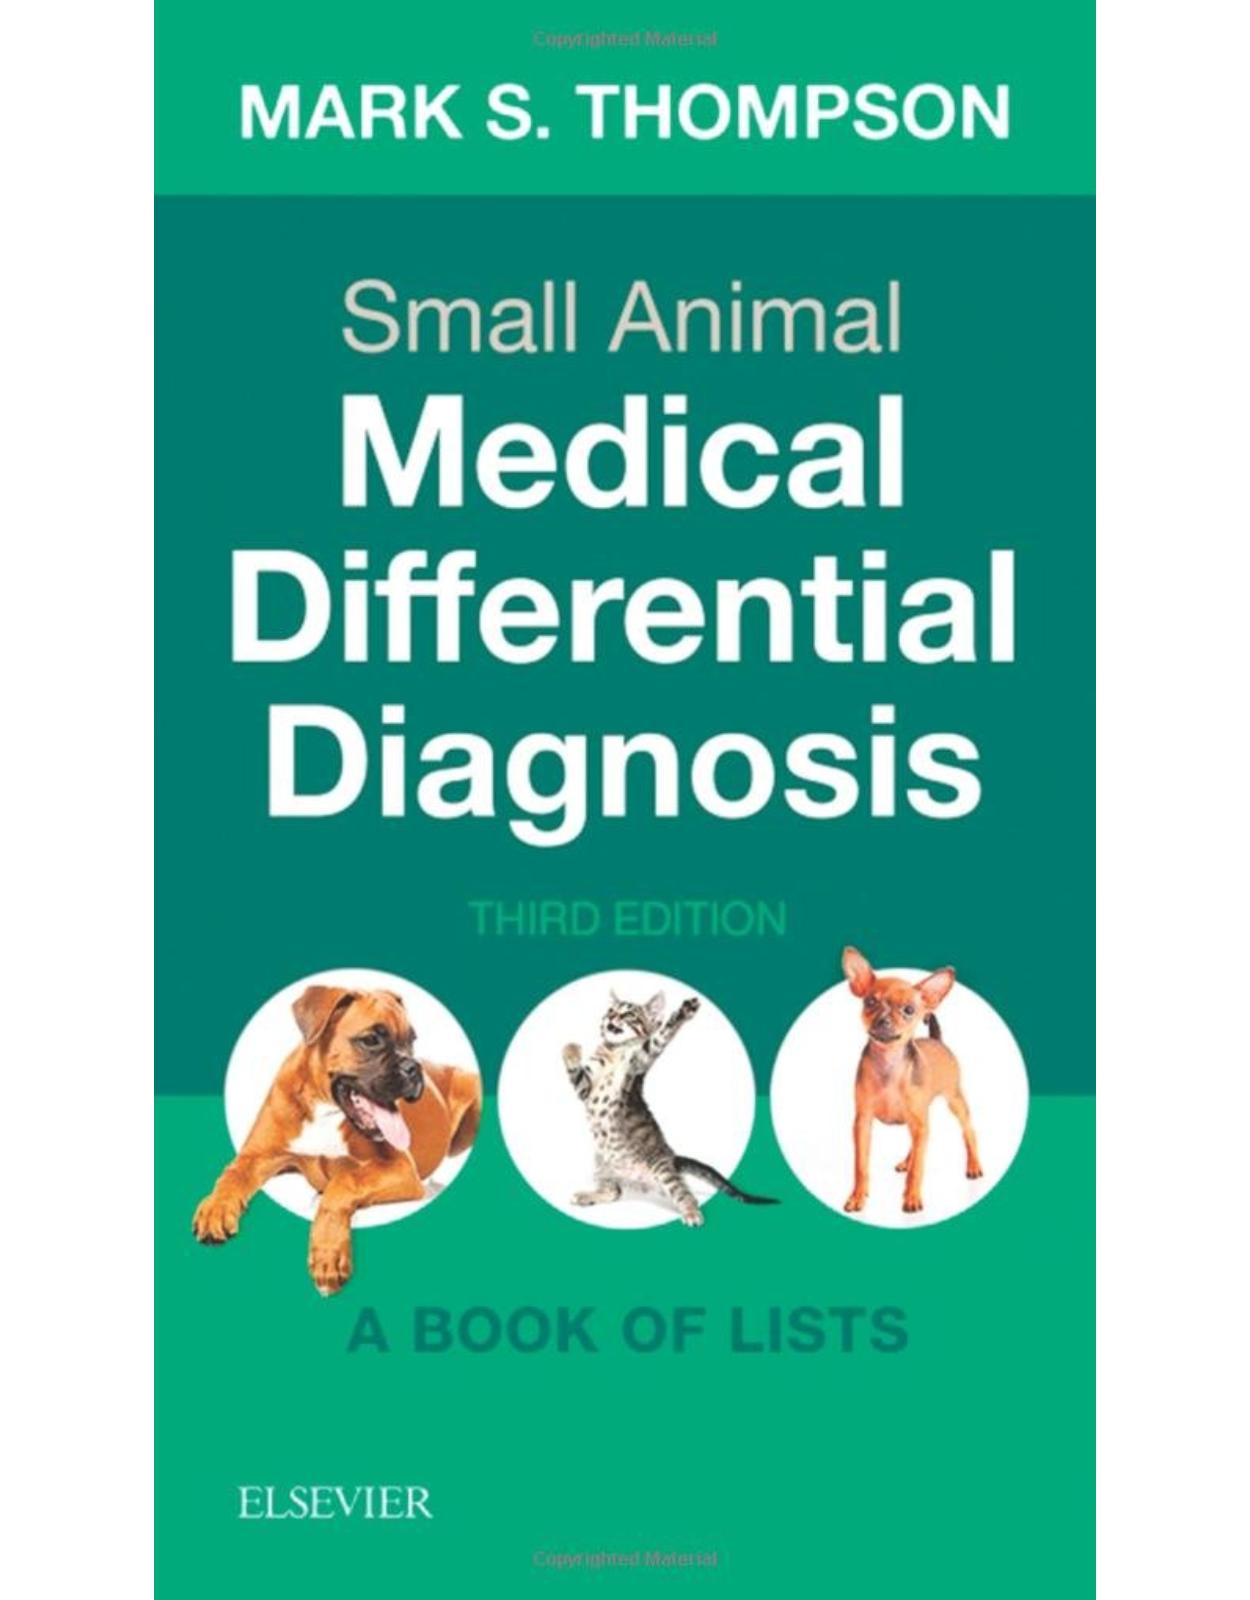 Small Animal Medical Differential Diagnosis, 3rd Edition